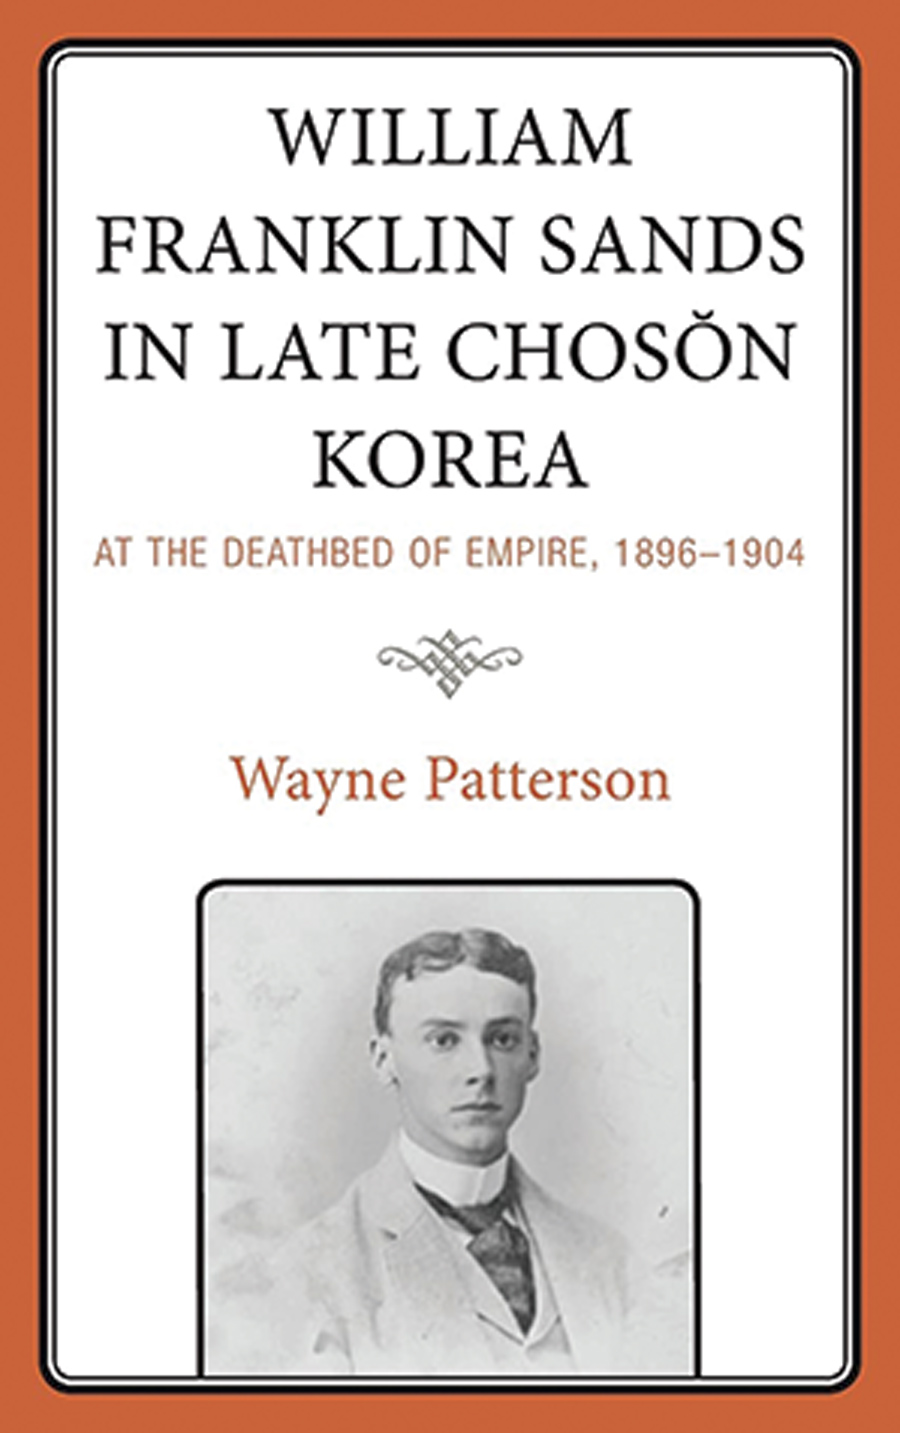 Cover of “William Franklin Sands in Late Choson Korea”